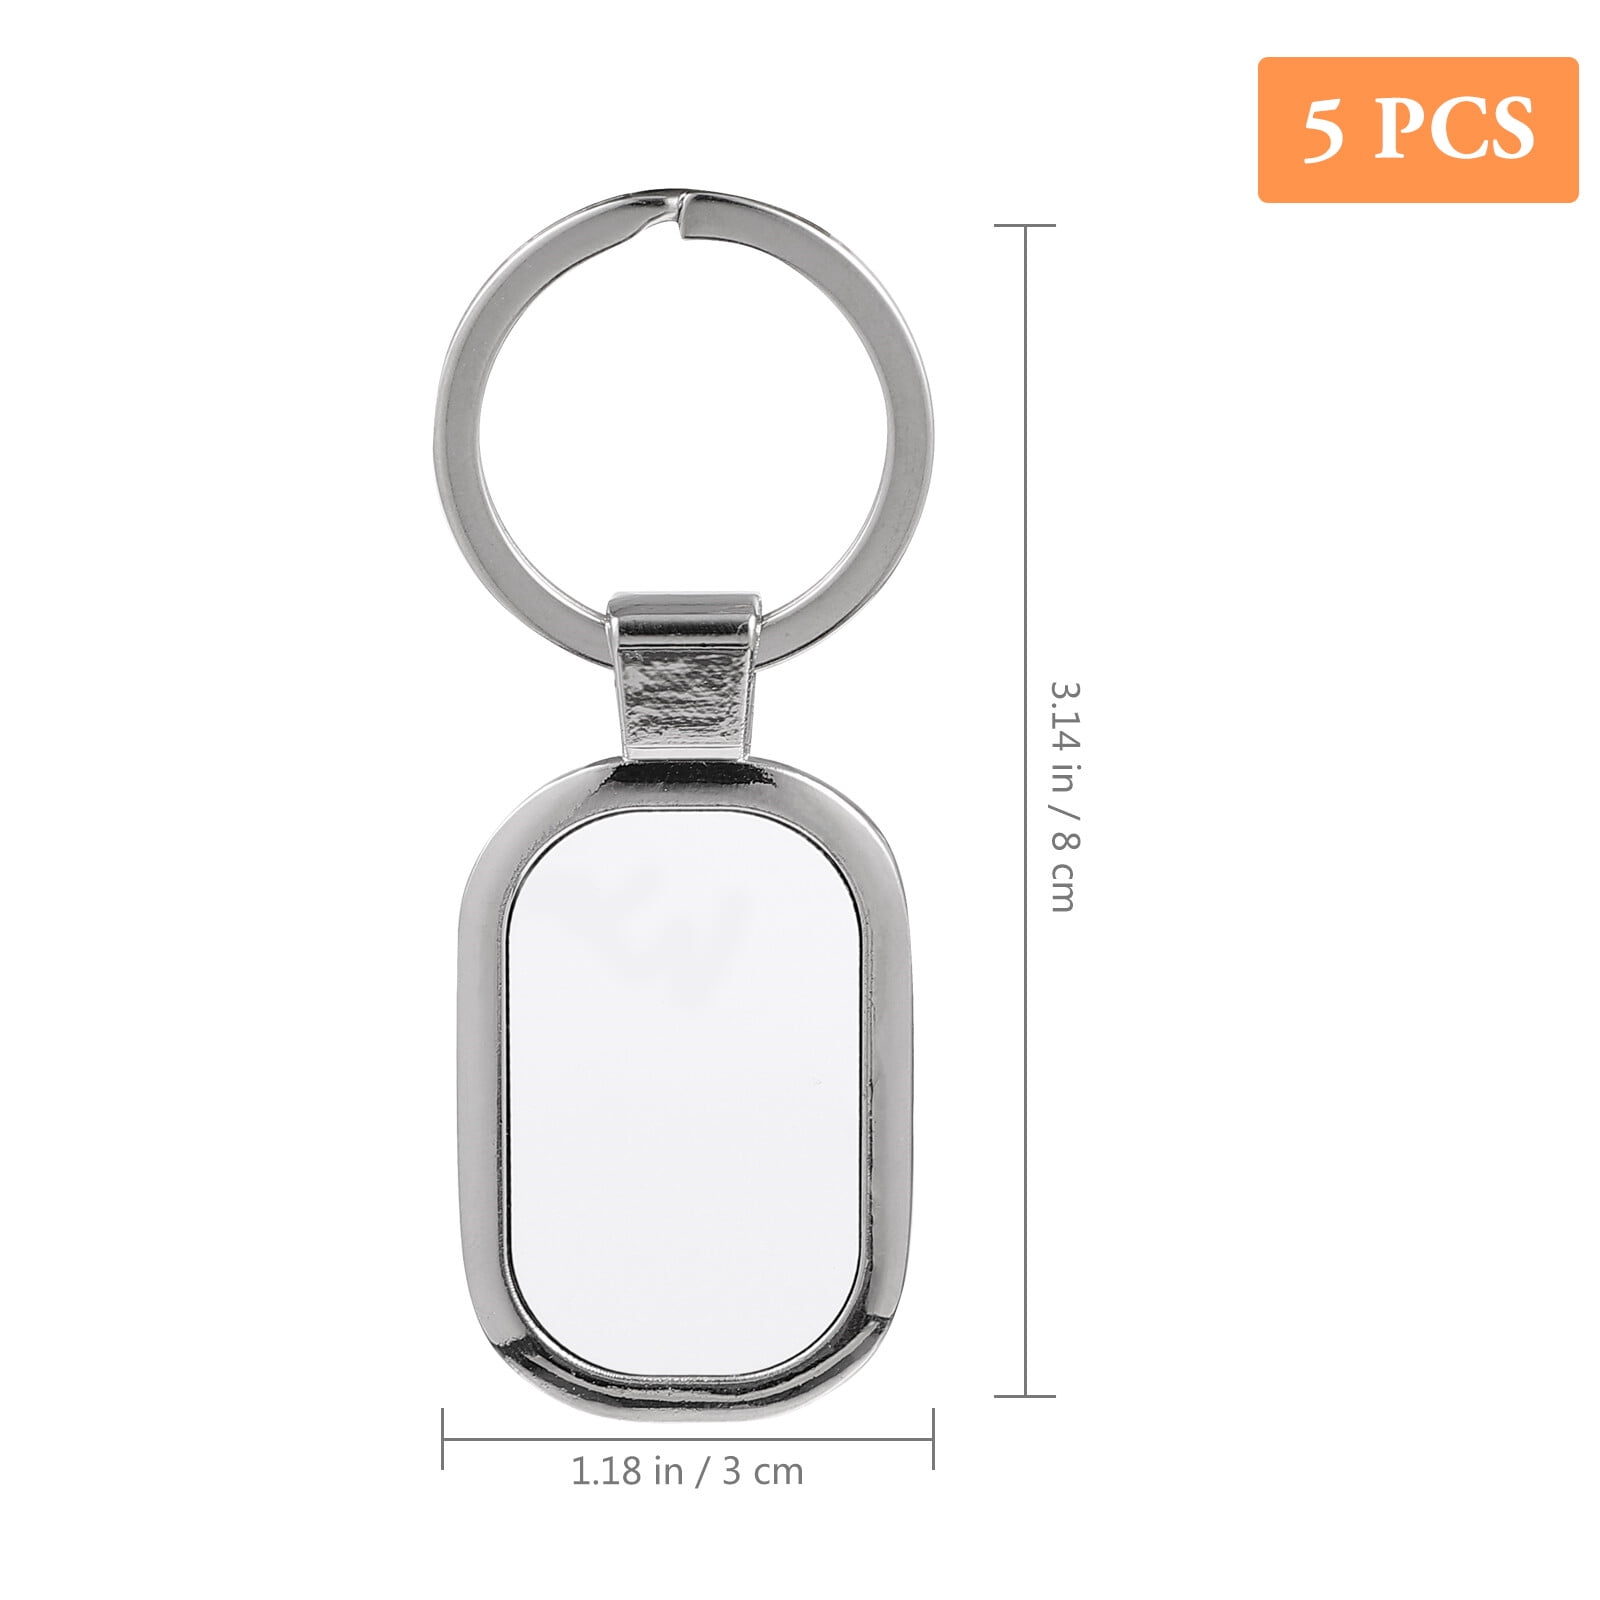 Sublimation Ring Travel Pouch Set With Blank Blanks For DIY Projects  Keychain From Sofuza, $25.29